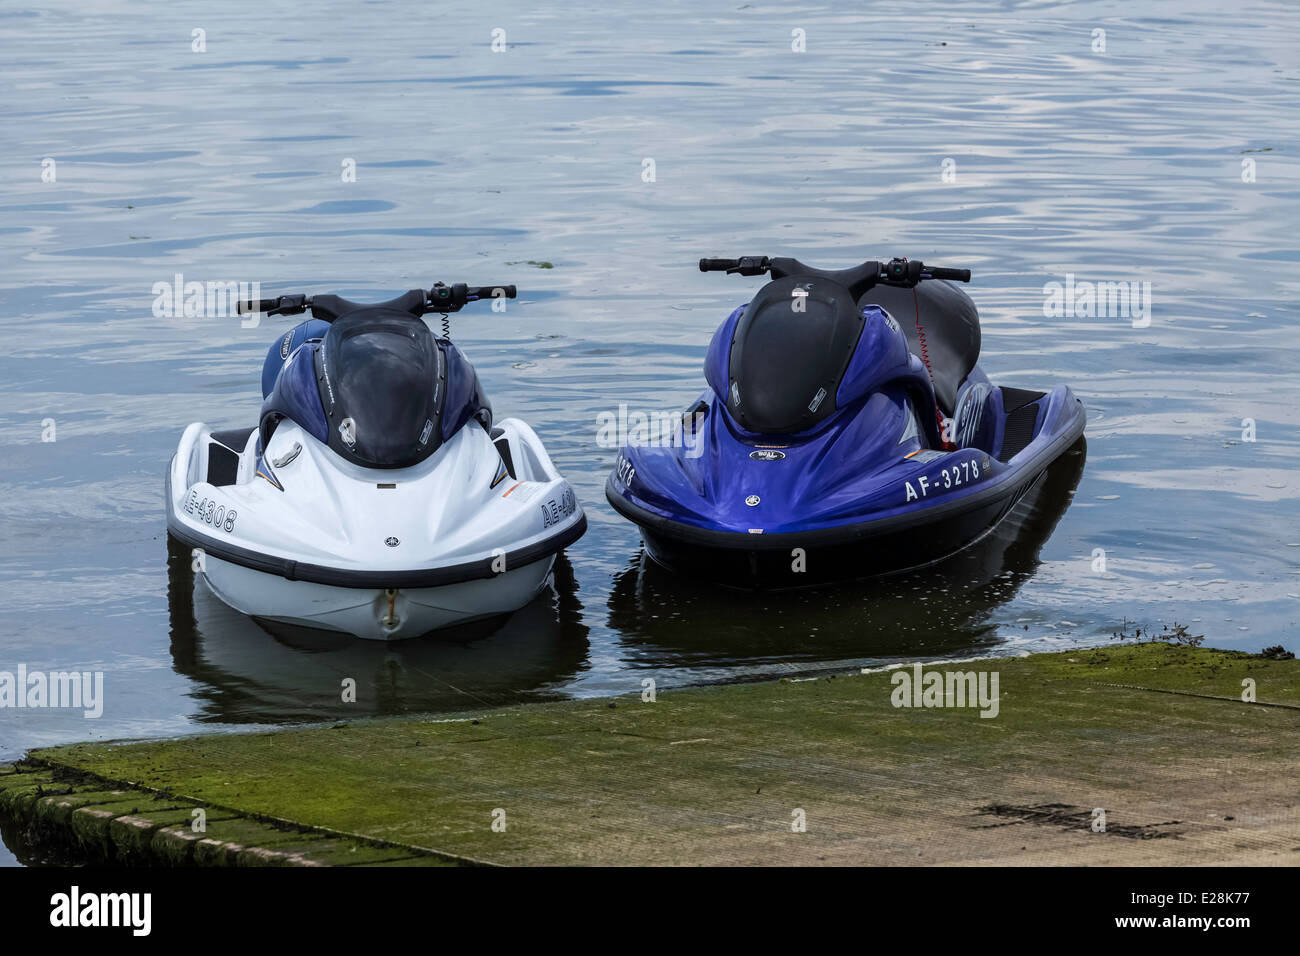 Pair of Jet Skis on WAter with No Riders Stock Photo